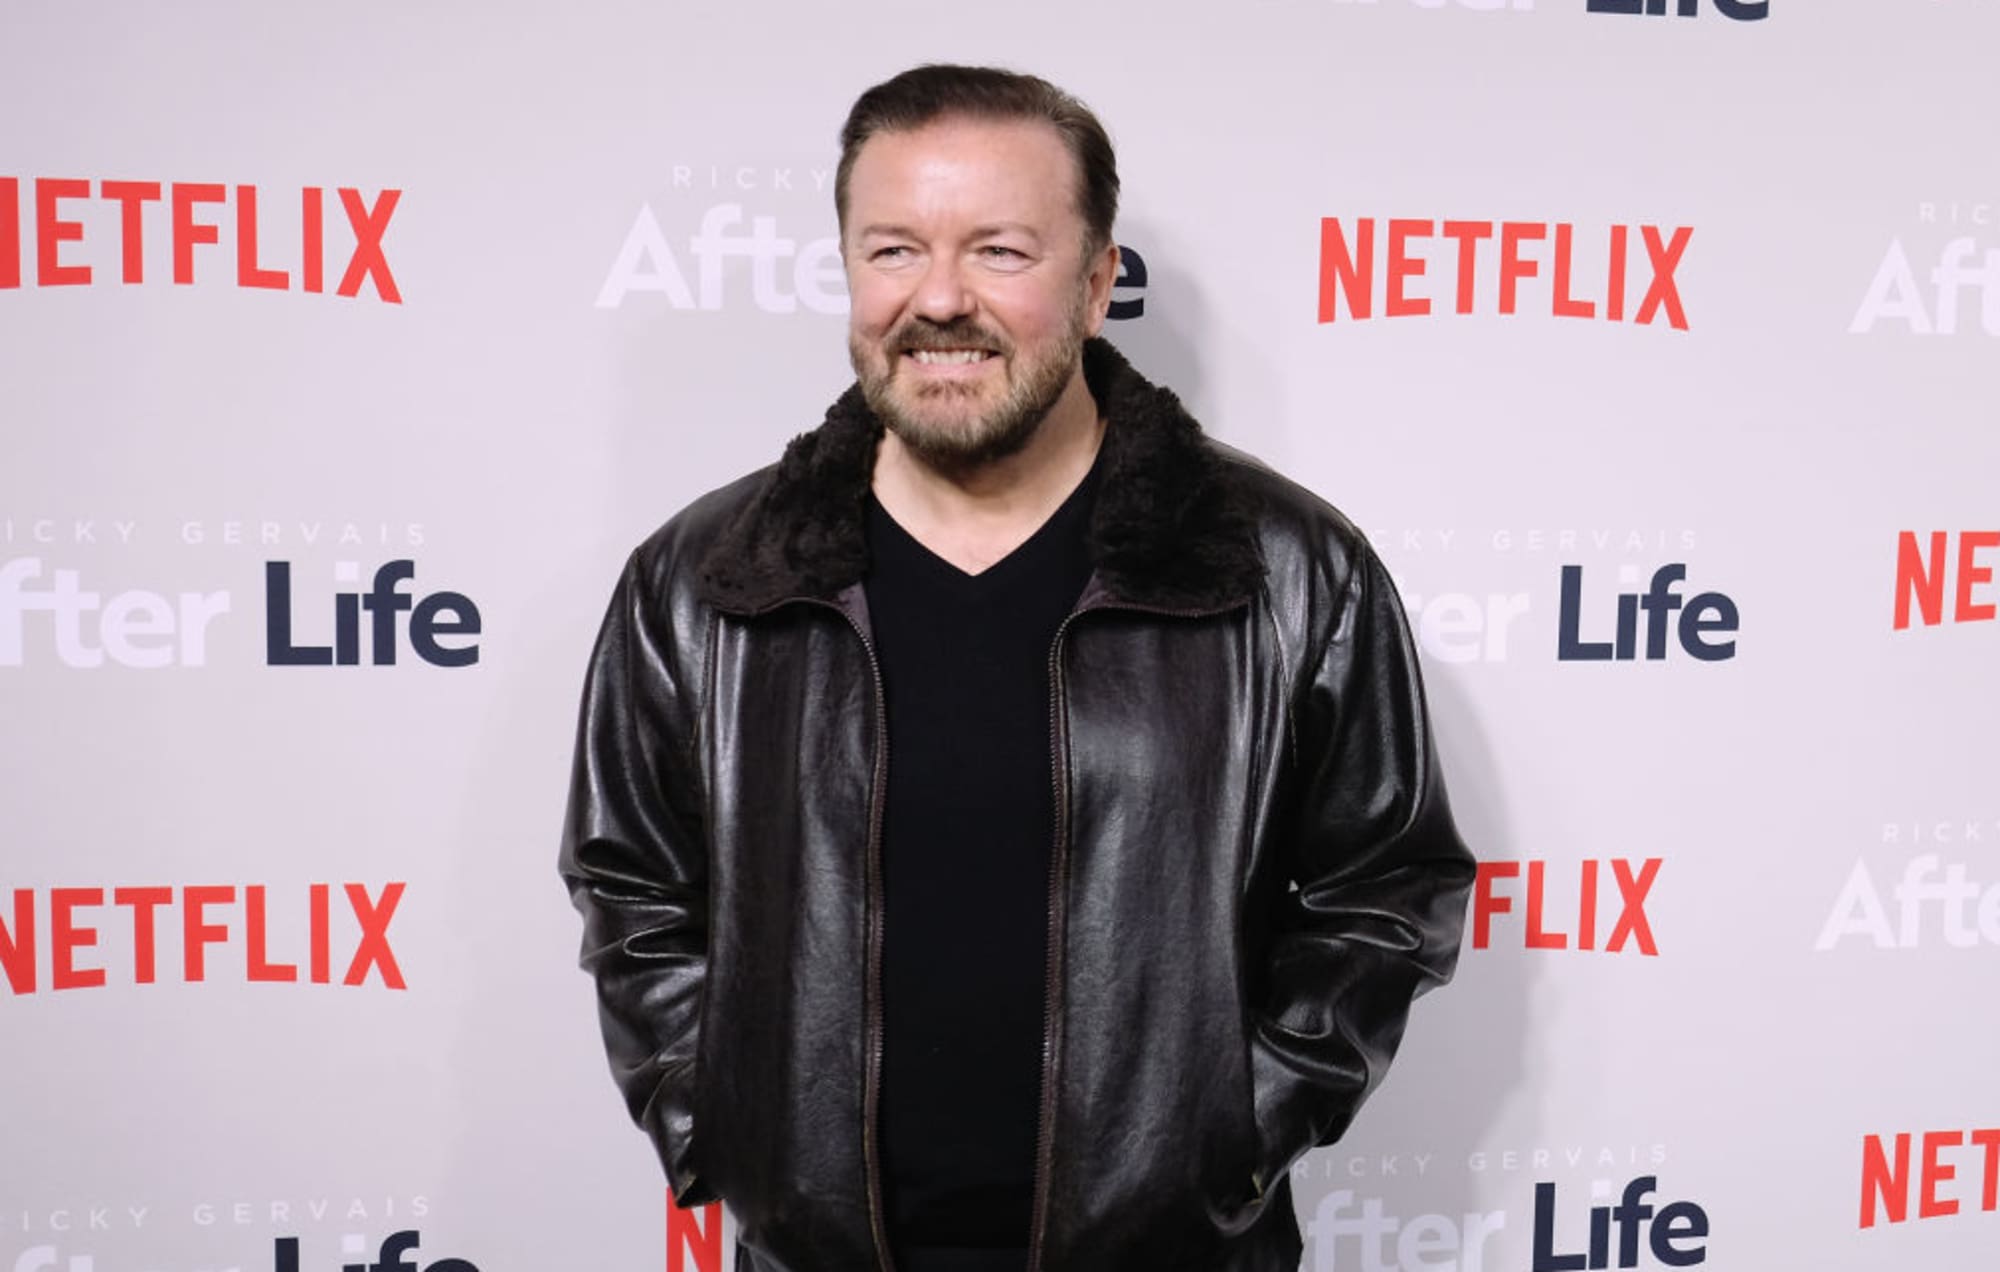 ”ricky-gervais-defends-his-netflix-show-against-comments-by-lgbt-rights-group”